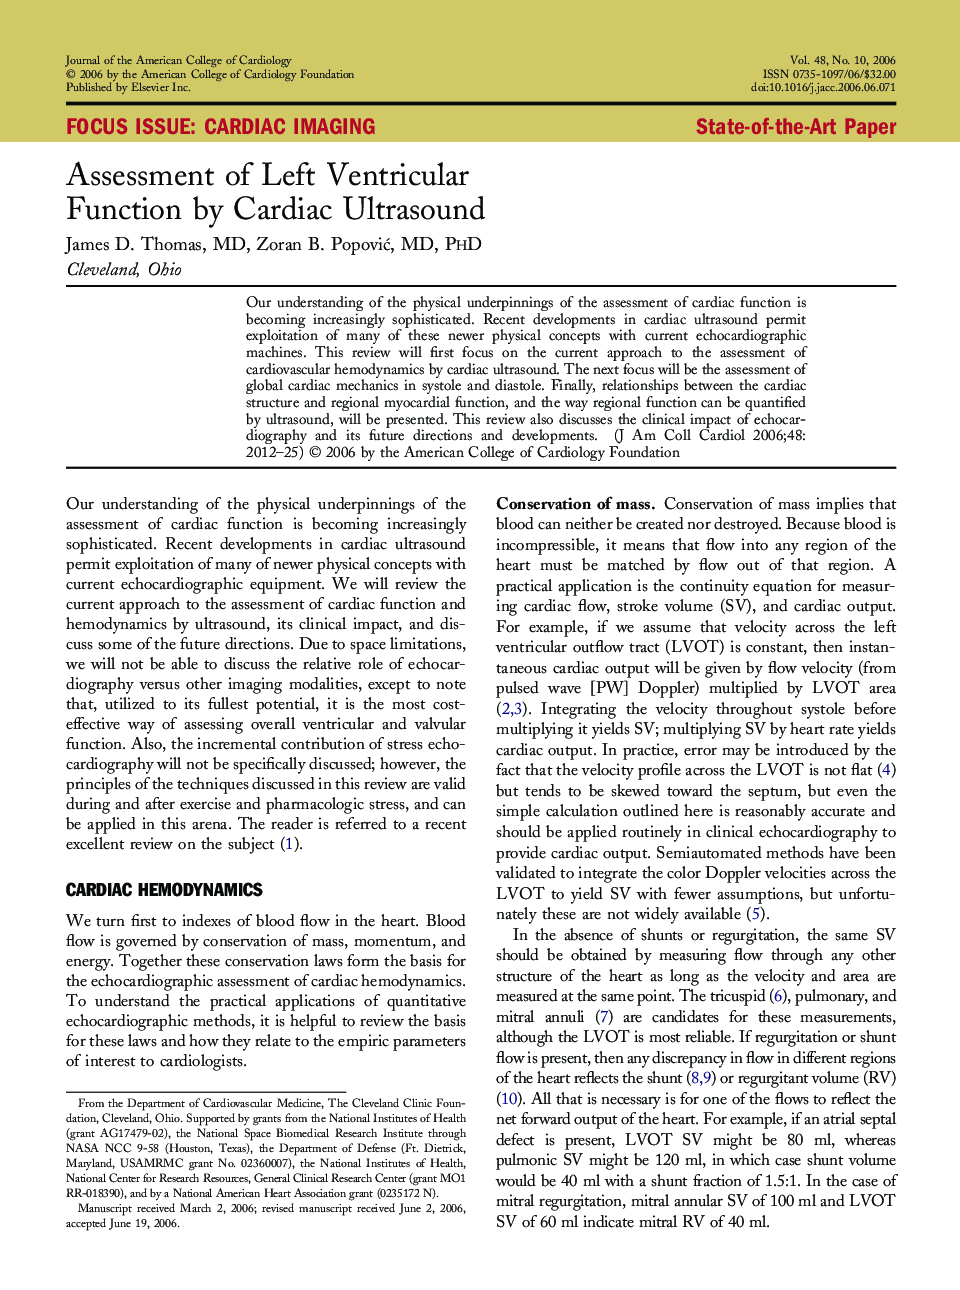 Assessment of Left Ventricular Function by Cardiac Ultrasound 